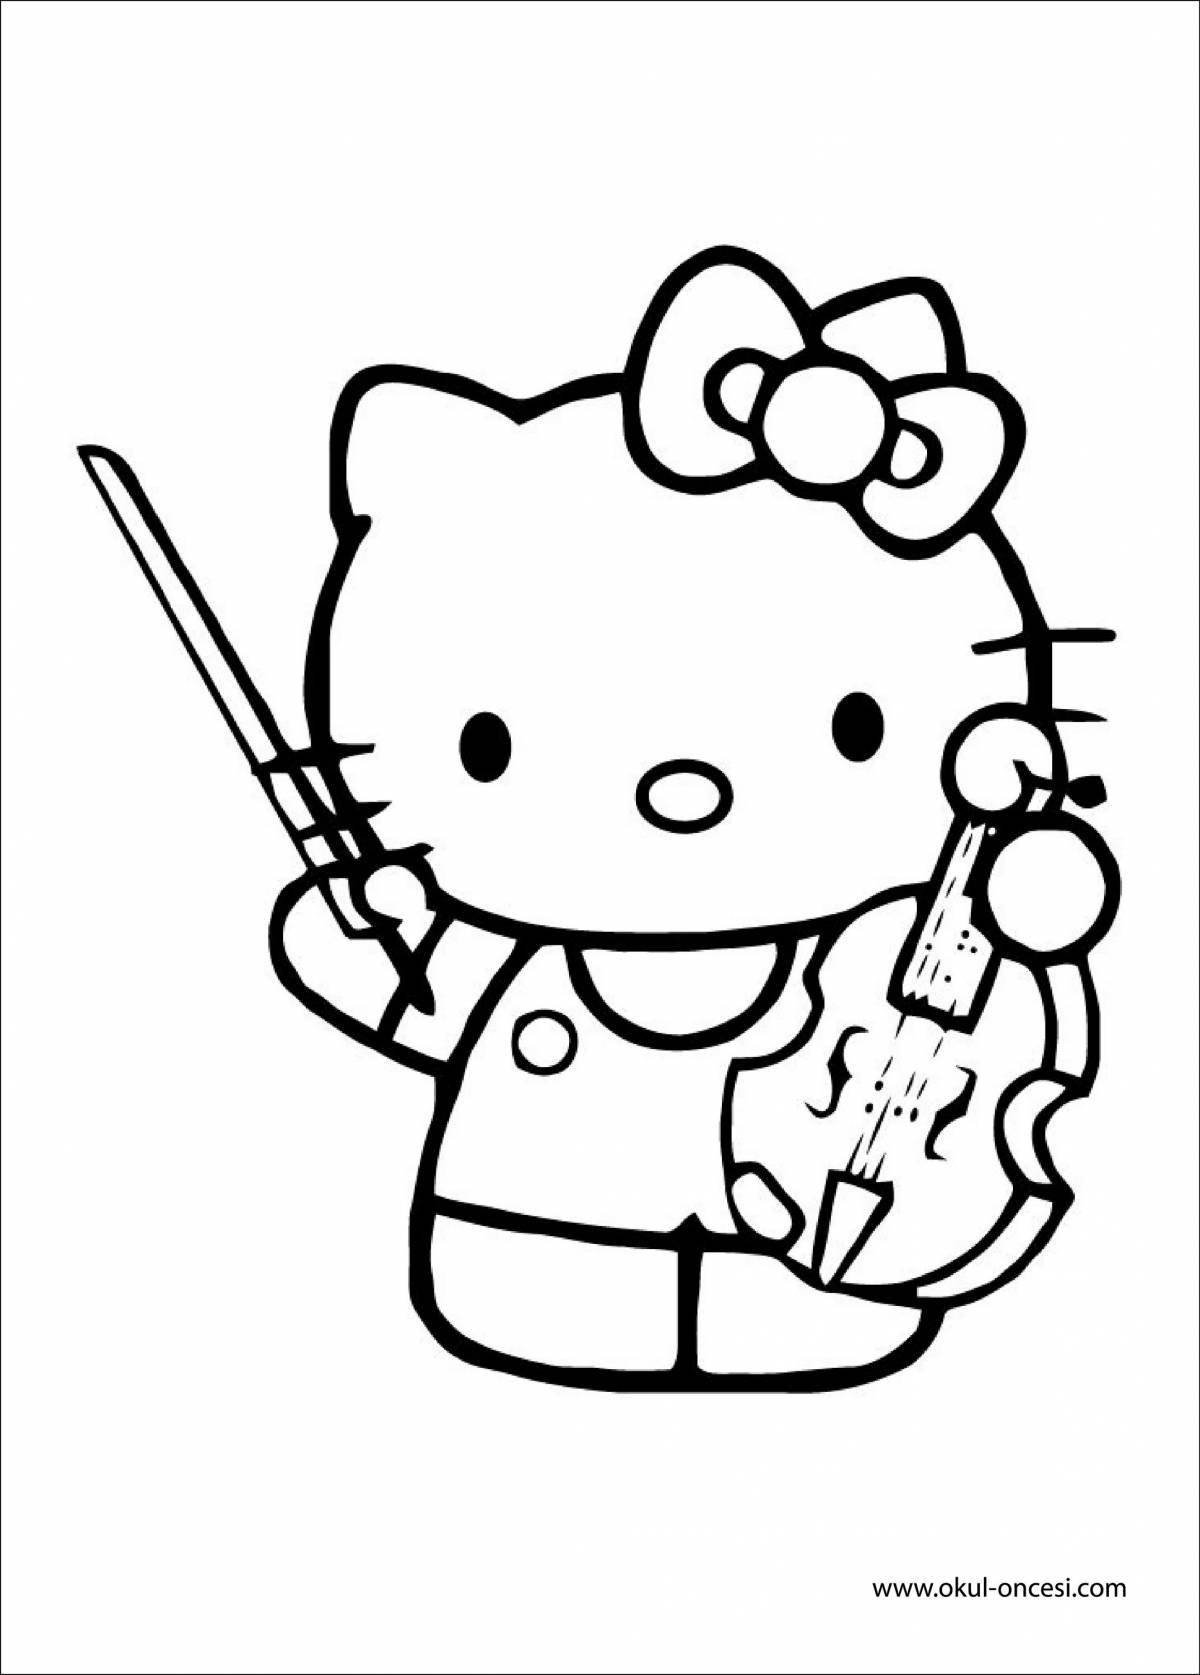 Outstanding hello kitty evil coloring page